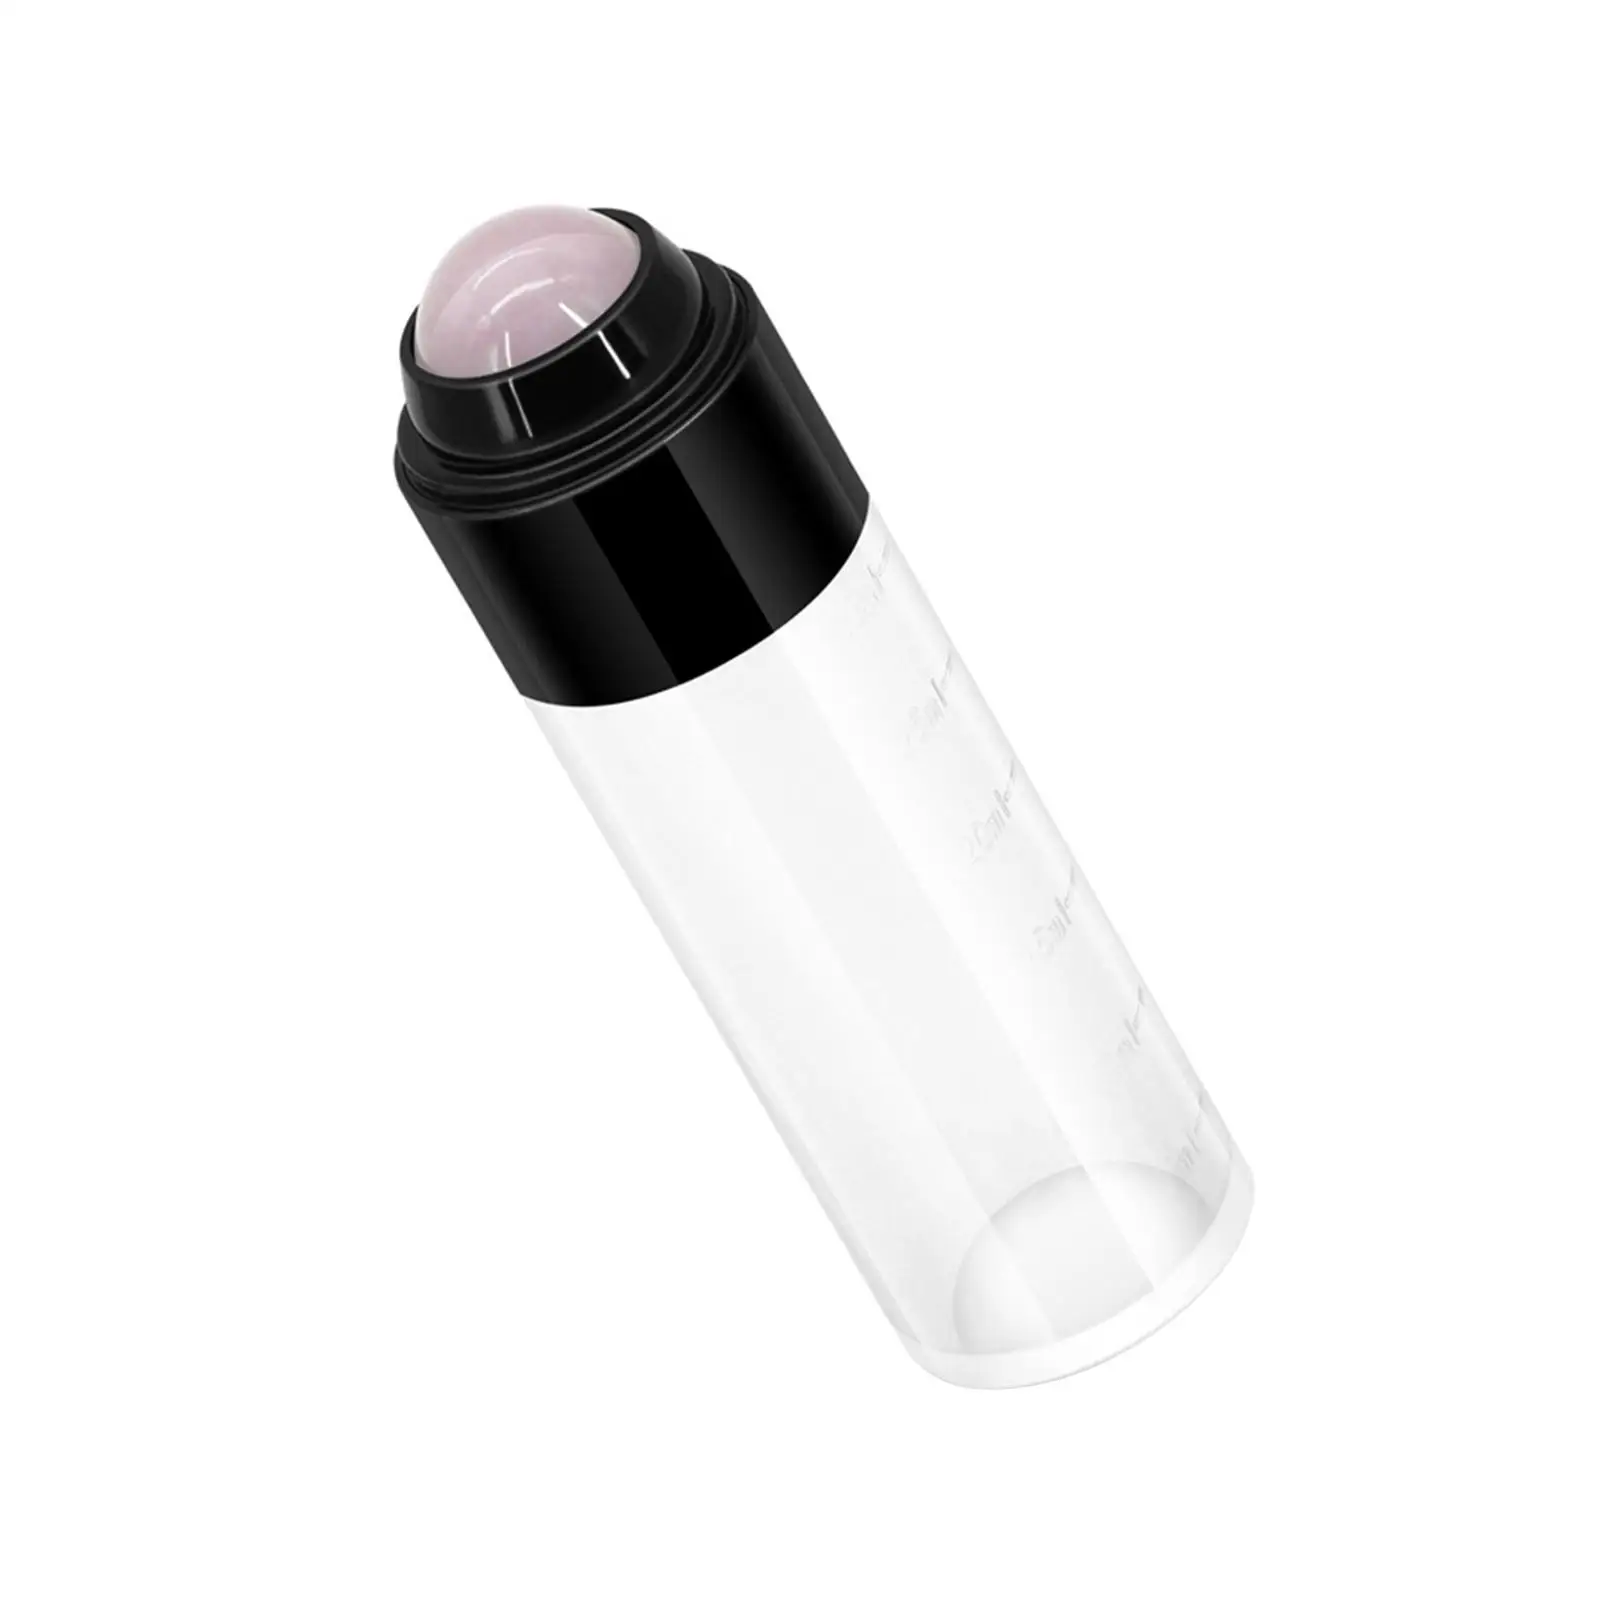 Roll on Perfume Bottles 30ml with Stone Ball Portable Roller Bottles Essential Oil Container Roller Balls for Essential Oils